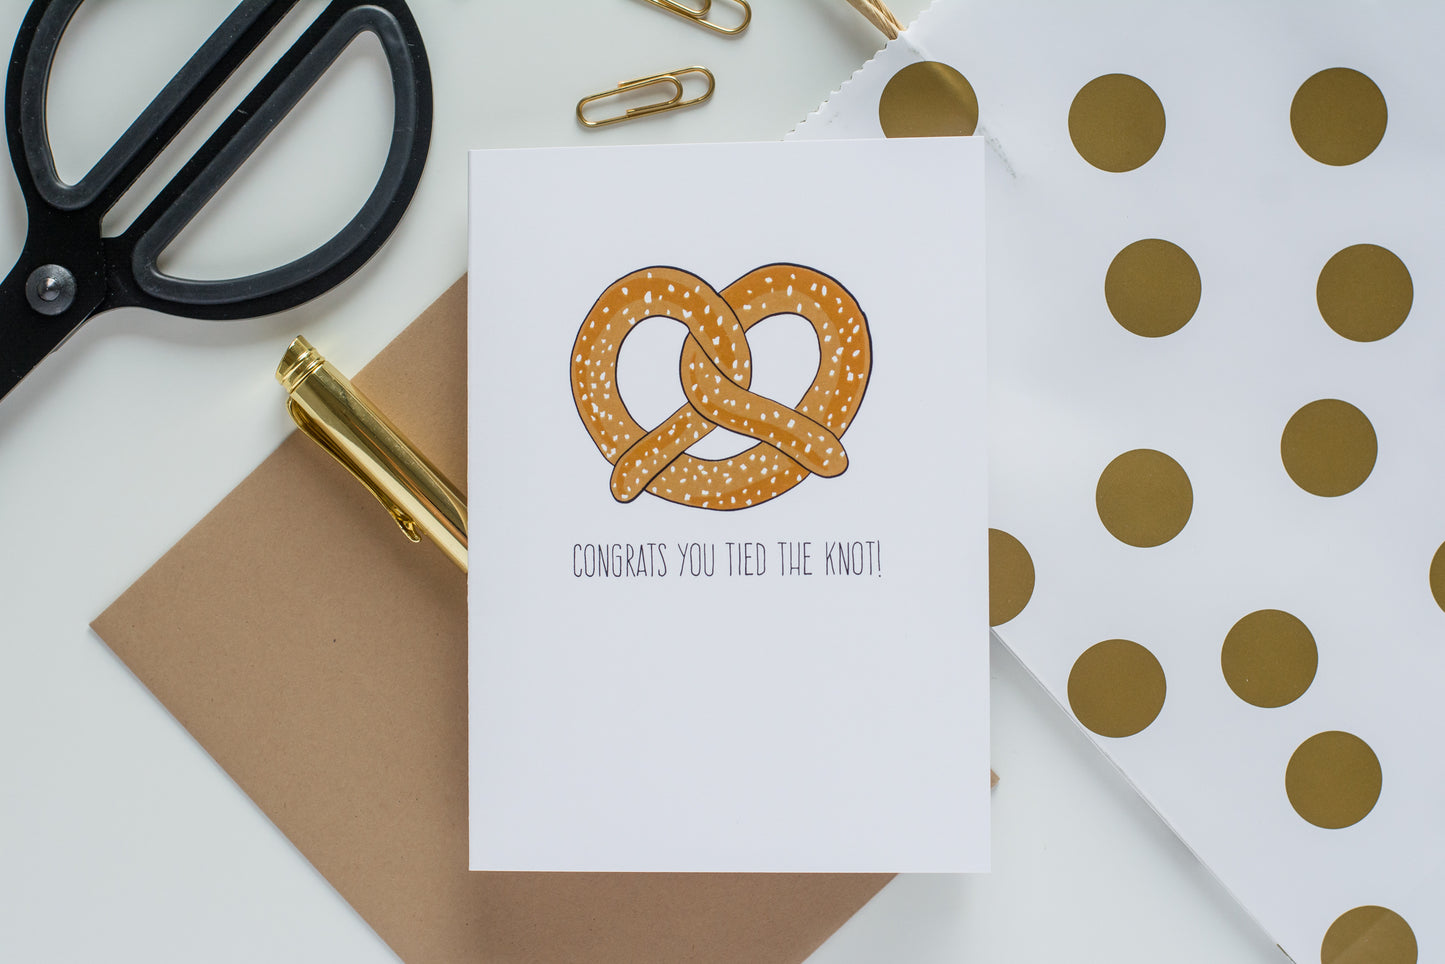 Congrats, You Tied The Knot!  - Greeting Card